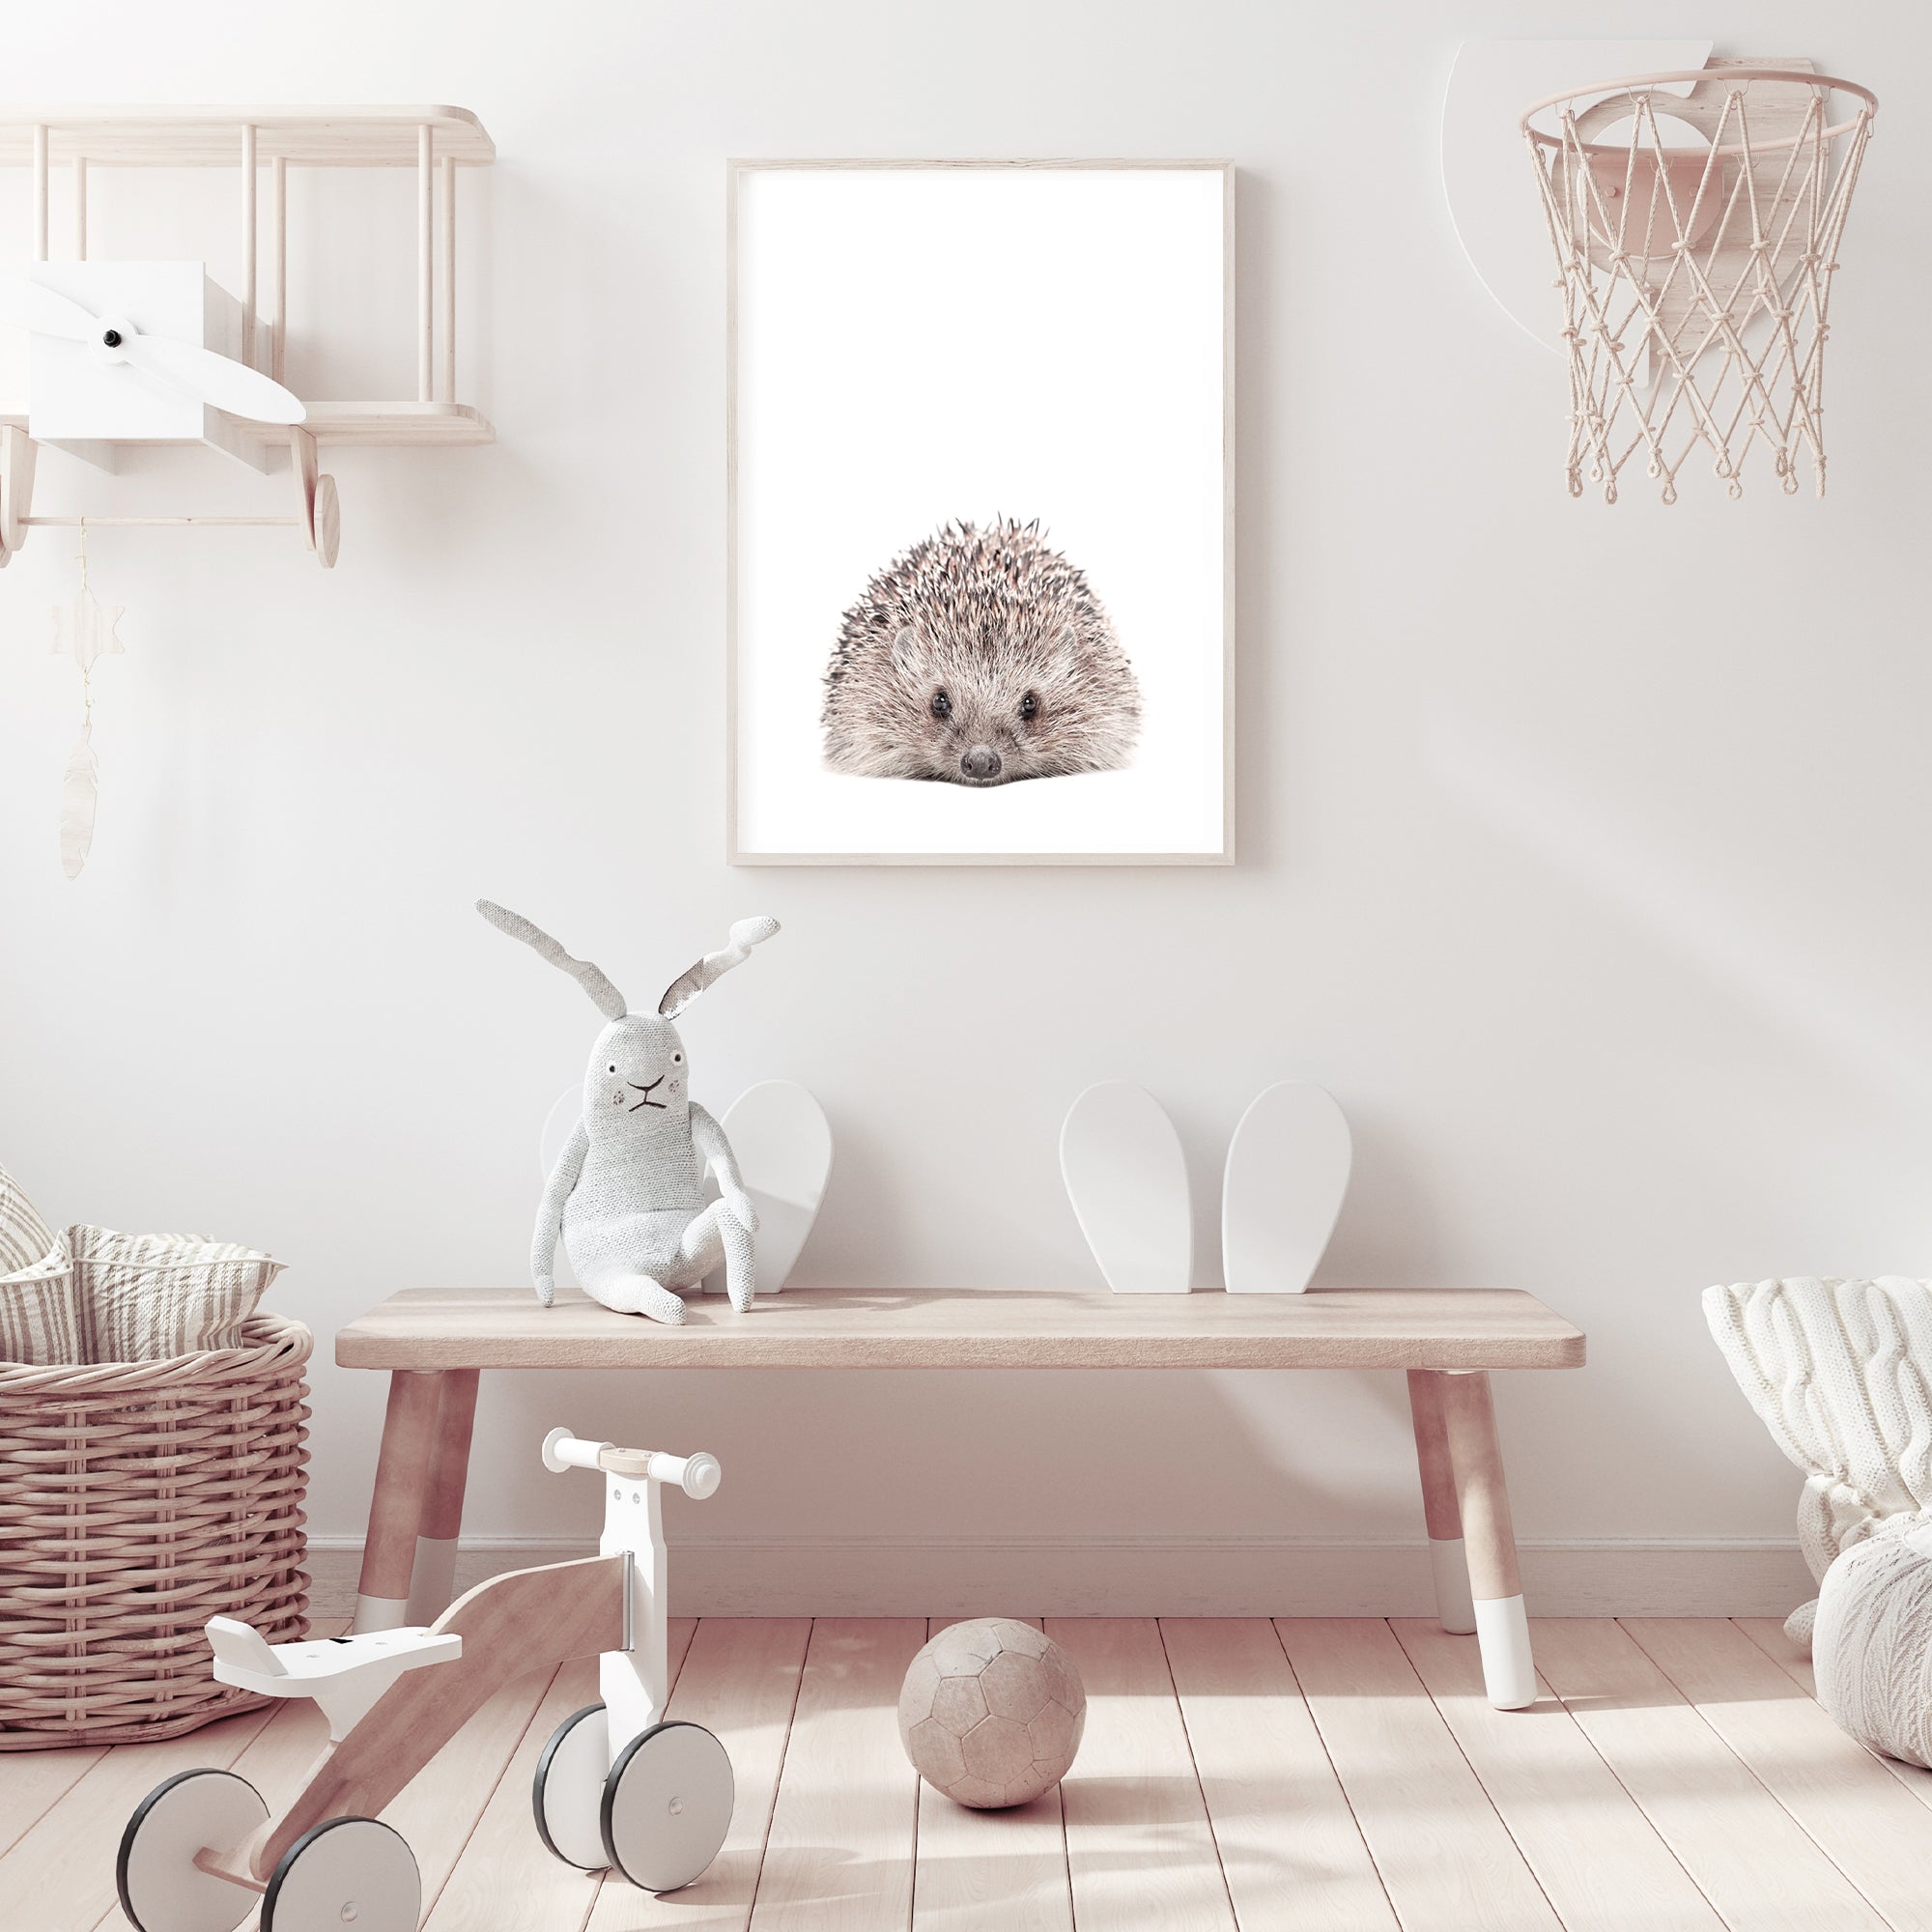 Perfect for your baby nursery, featuring the Animal Baby Hedgehog photo art print, available in an unframed poster print, stretched canvas or with a timber, white or black frame.